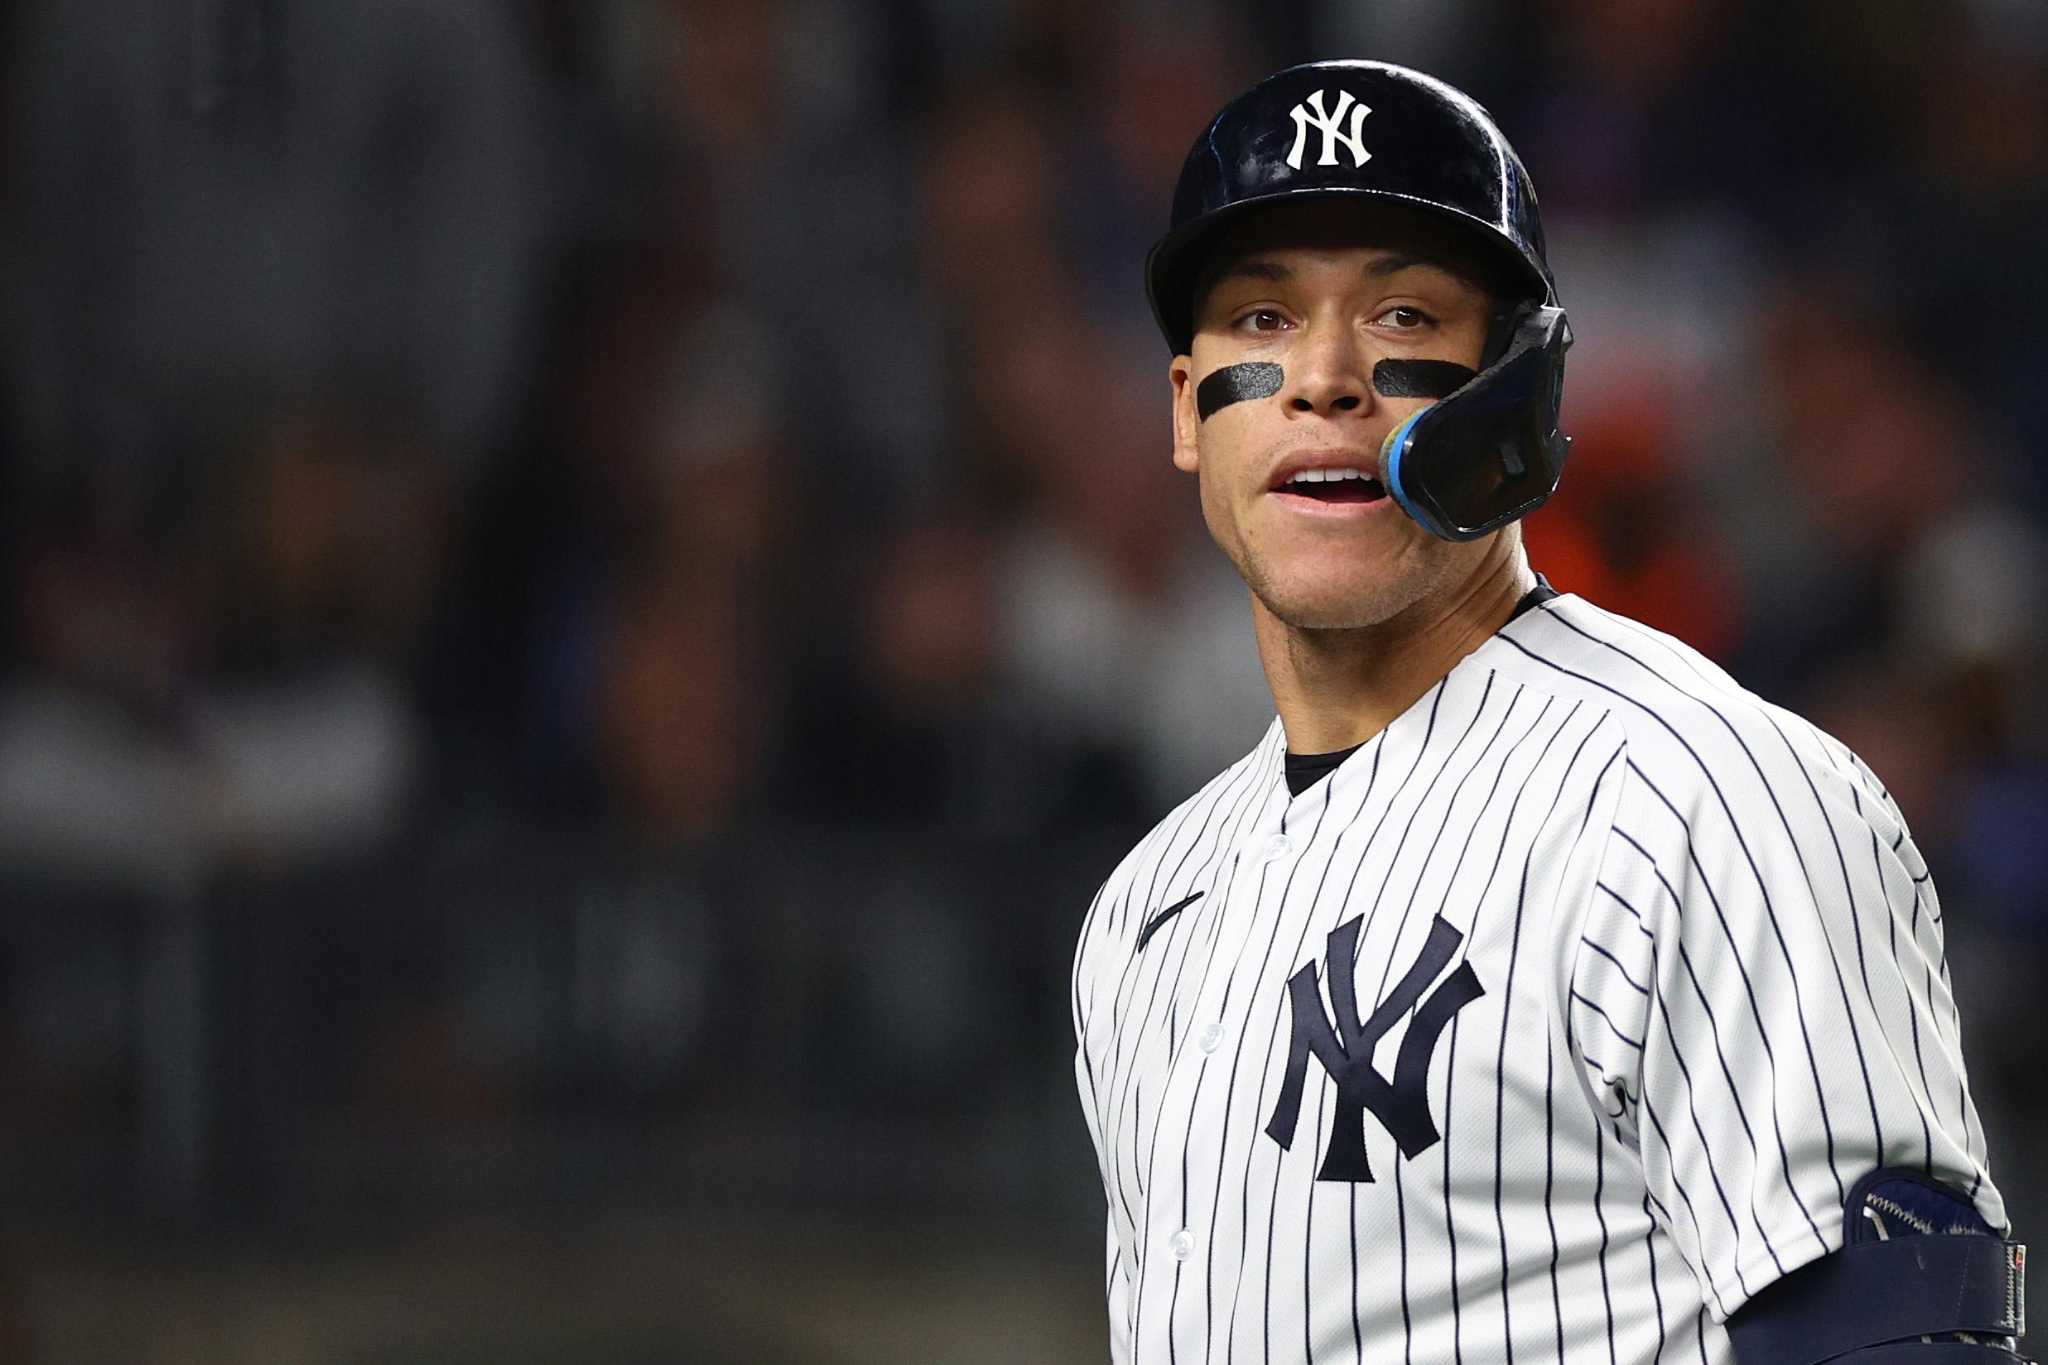 All-Star Game 2018: Aaron Judge breaks slight Yankees drought with